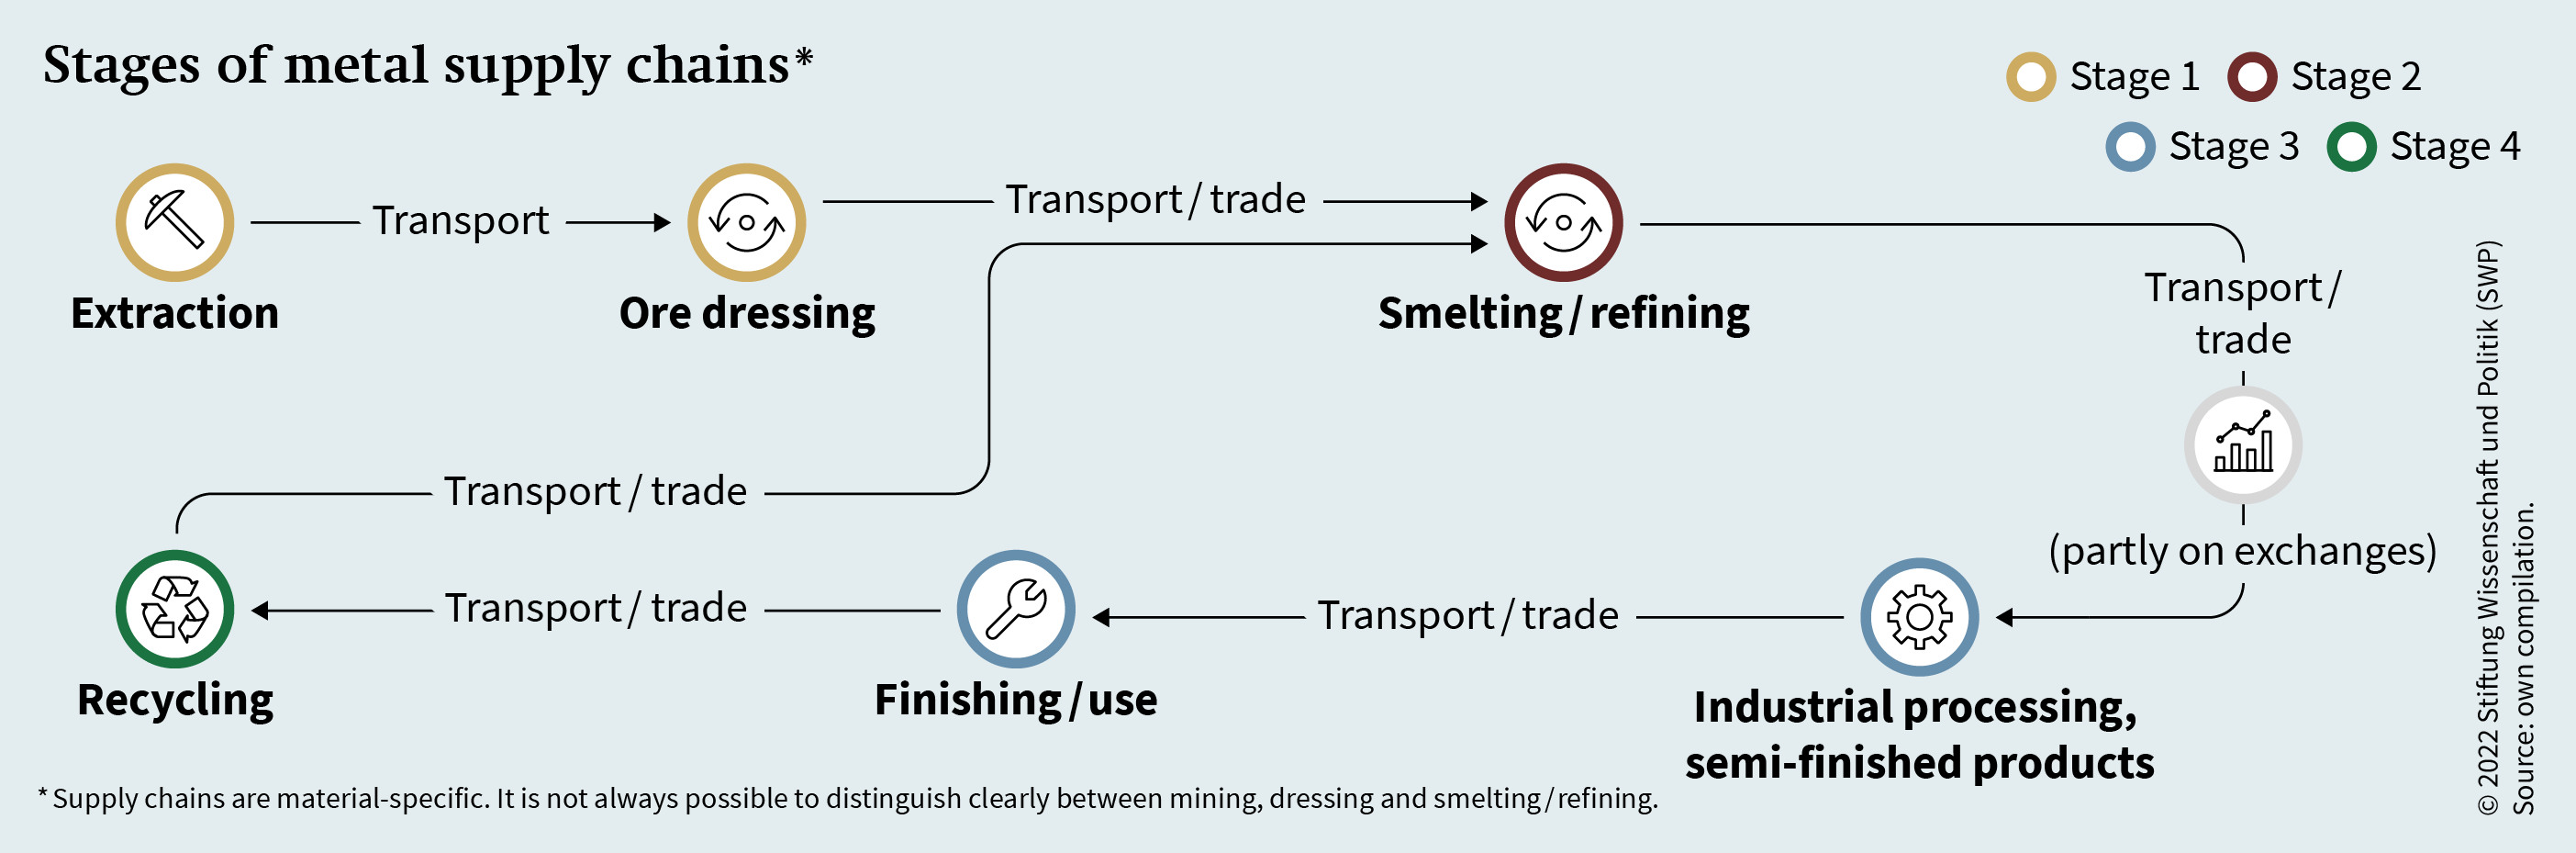 Stages of metal supply chains